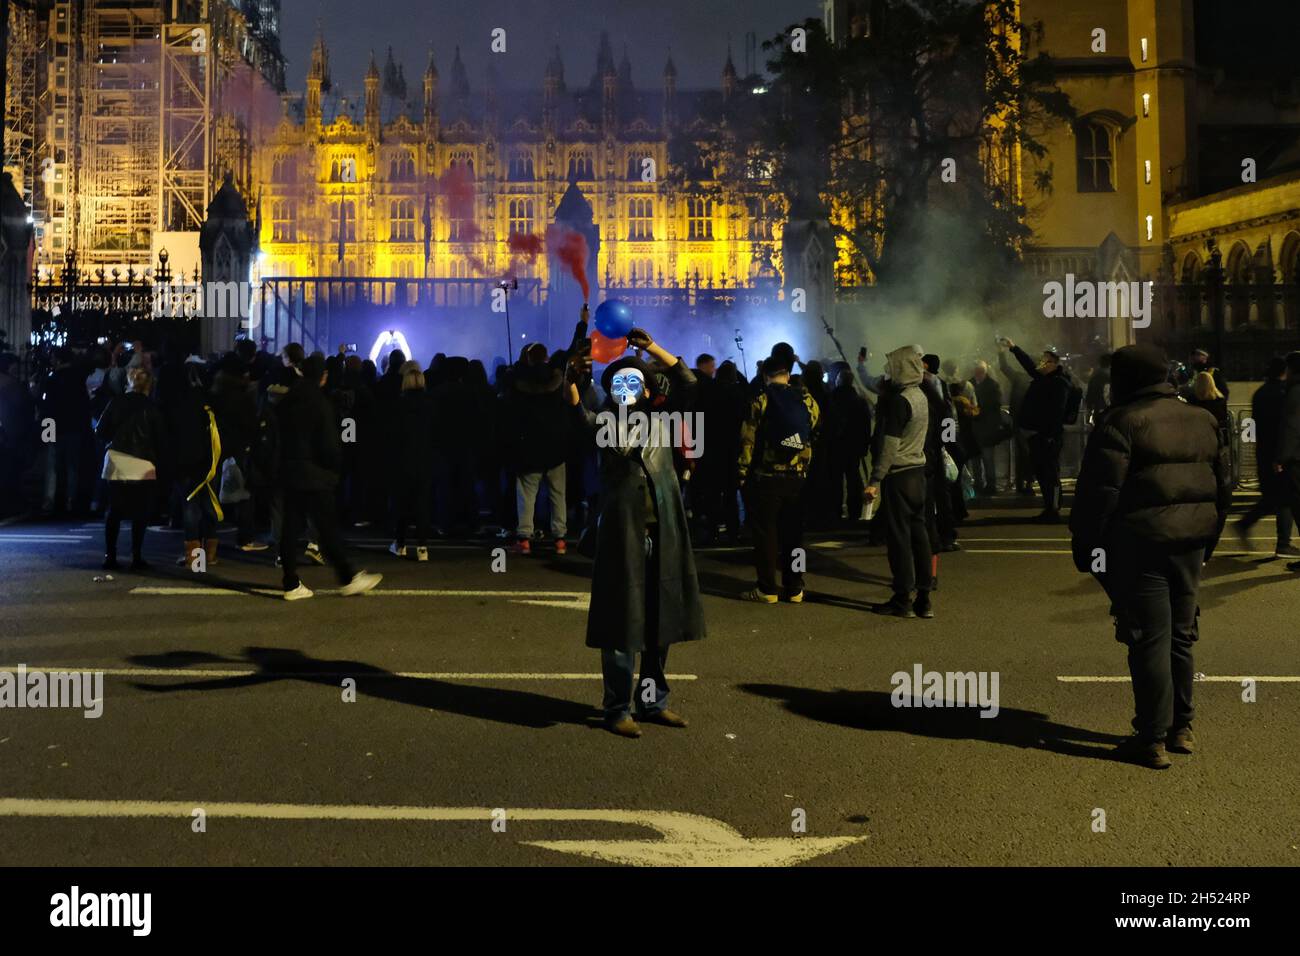 London, UK, 5th Nov, 2021. Protesters gathered for the Million Mask March in central London where numerous fireworks and smoke flares were set off around Parliament Square. Numbers were boosted for the anti-establishment demonstration by anti-vaccine passport protesters joining in this year. Credit: Eleventh Hour Photography/Alamy Live News Stock Photo